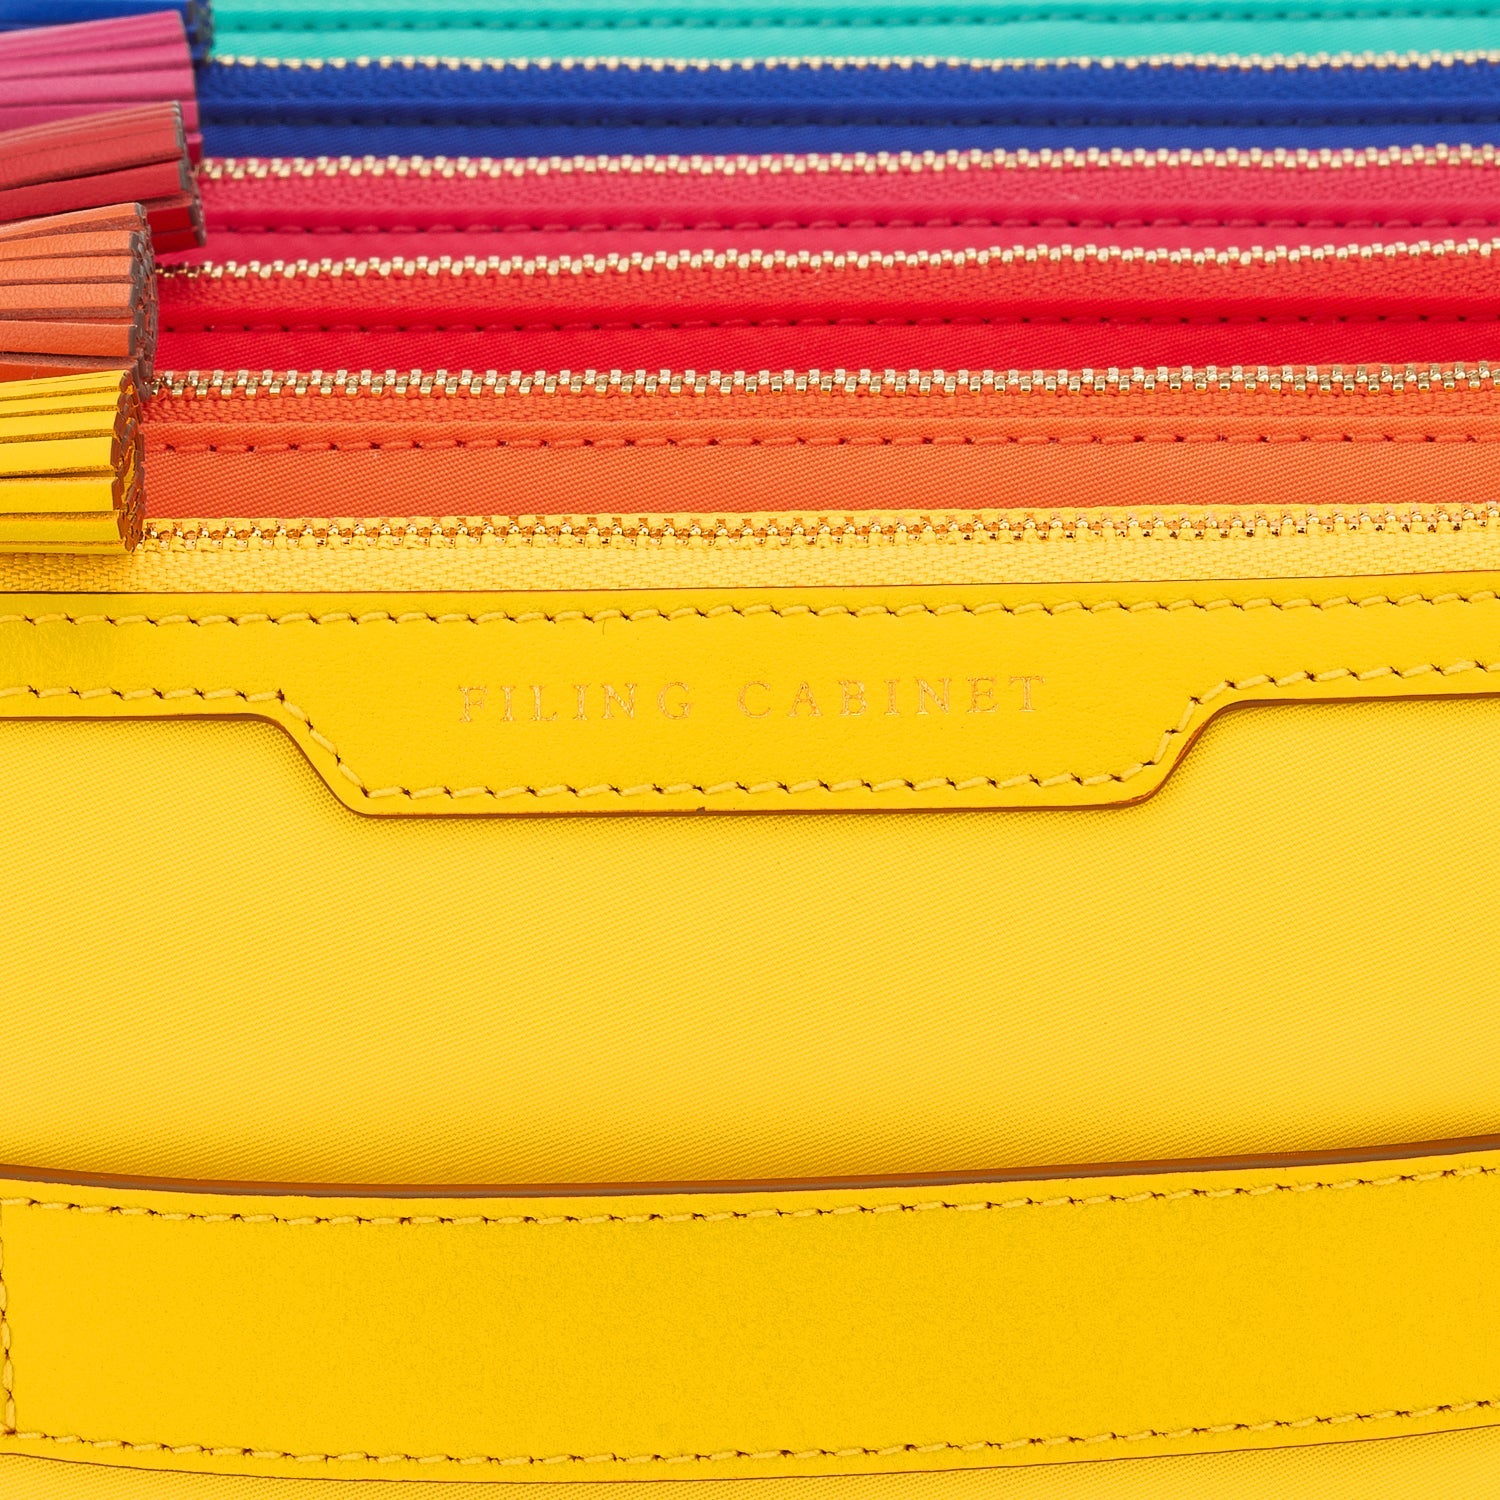 Filing Cabinet Pouch -

                  
                    Nylon in Multi -
                  

                  Anya Hindmarch EU
